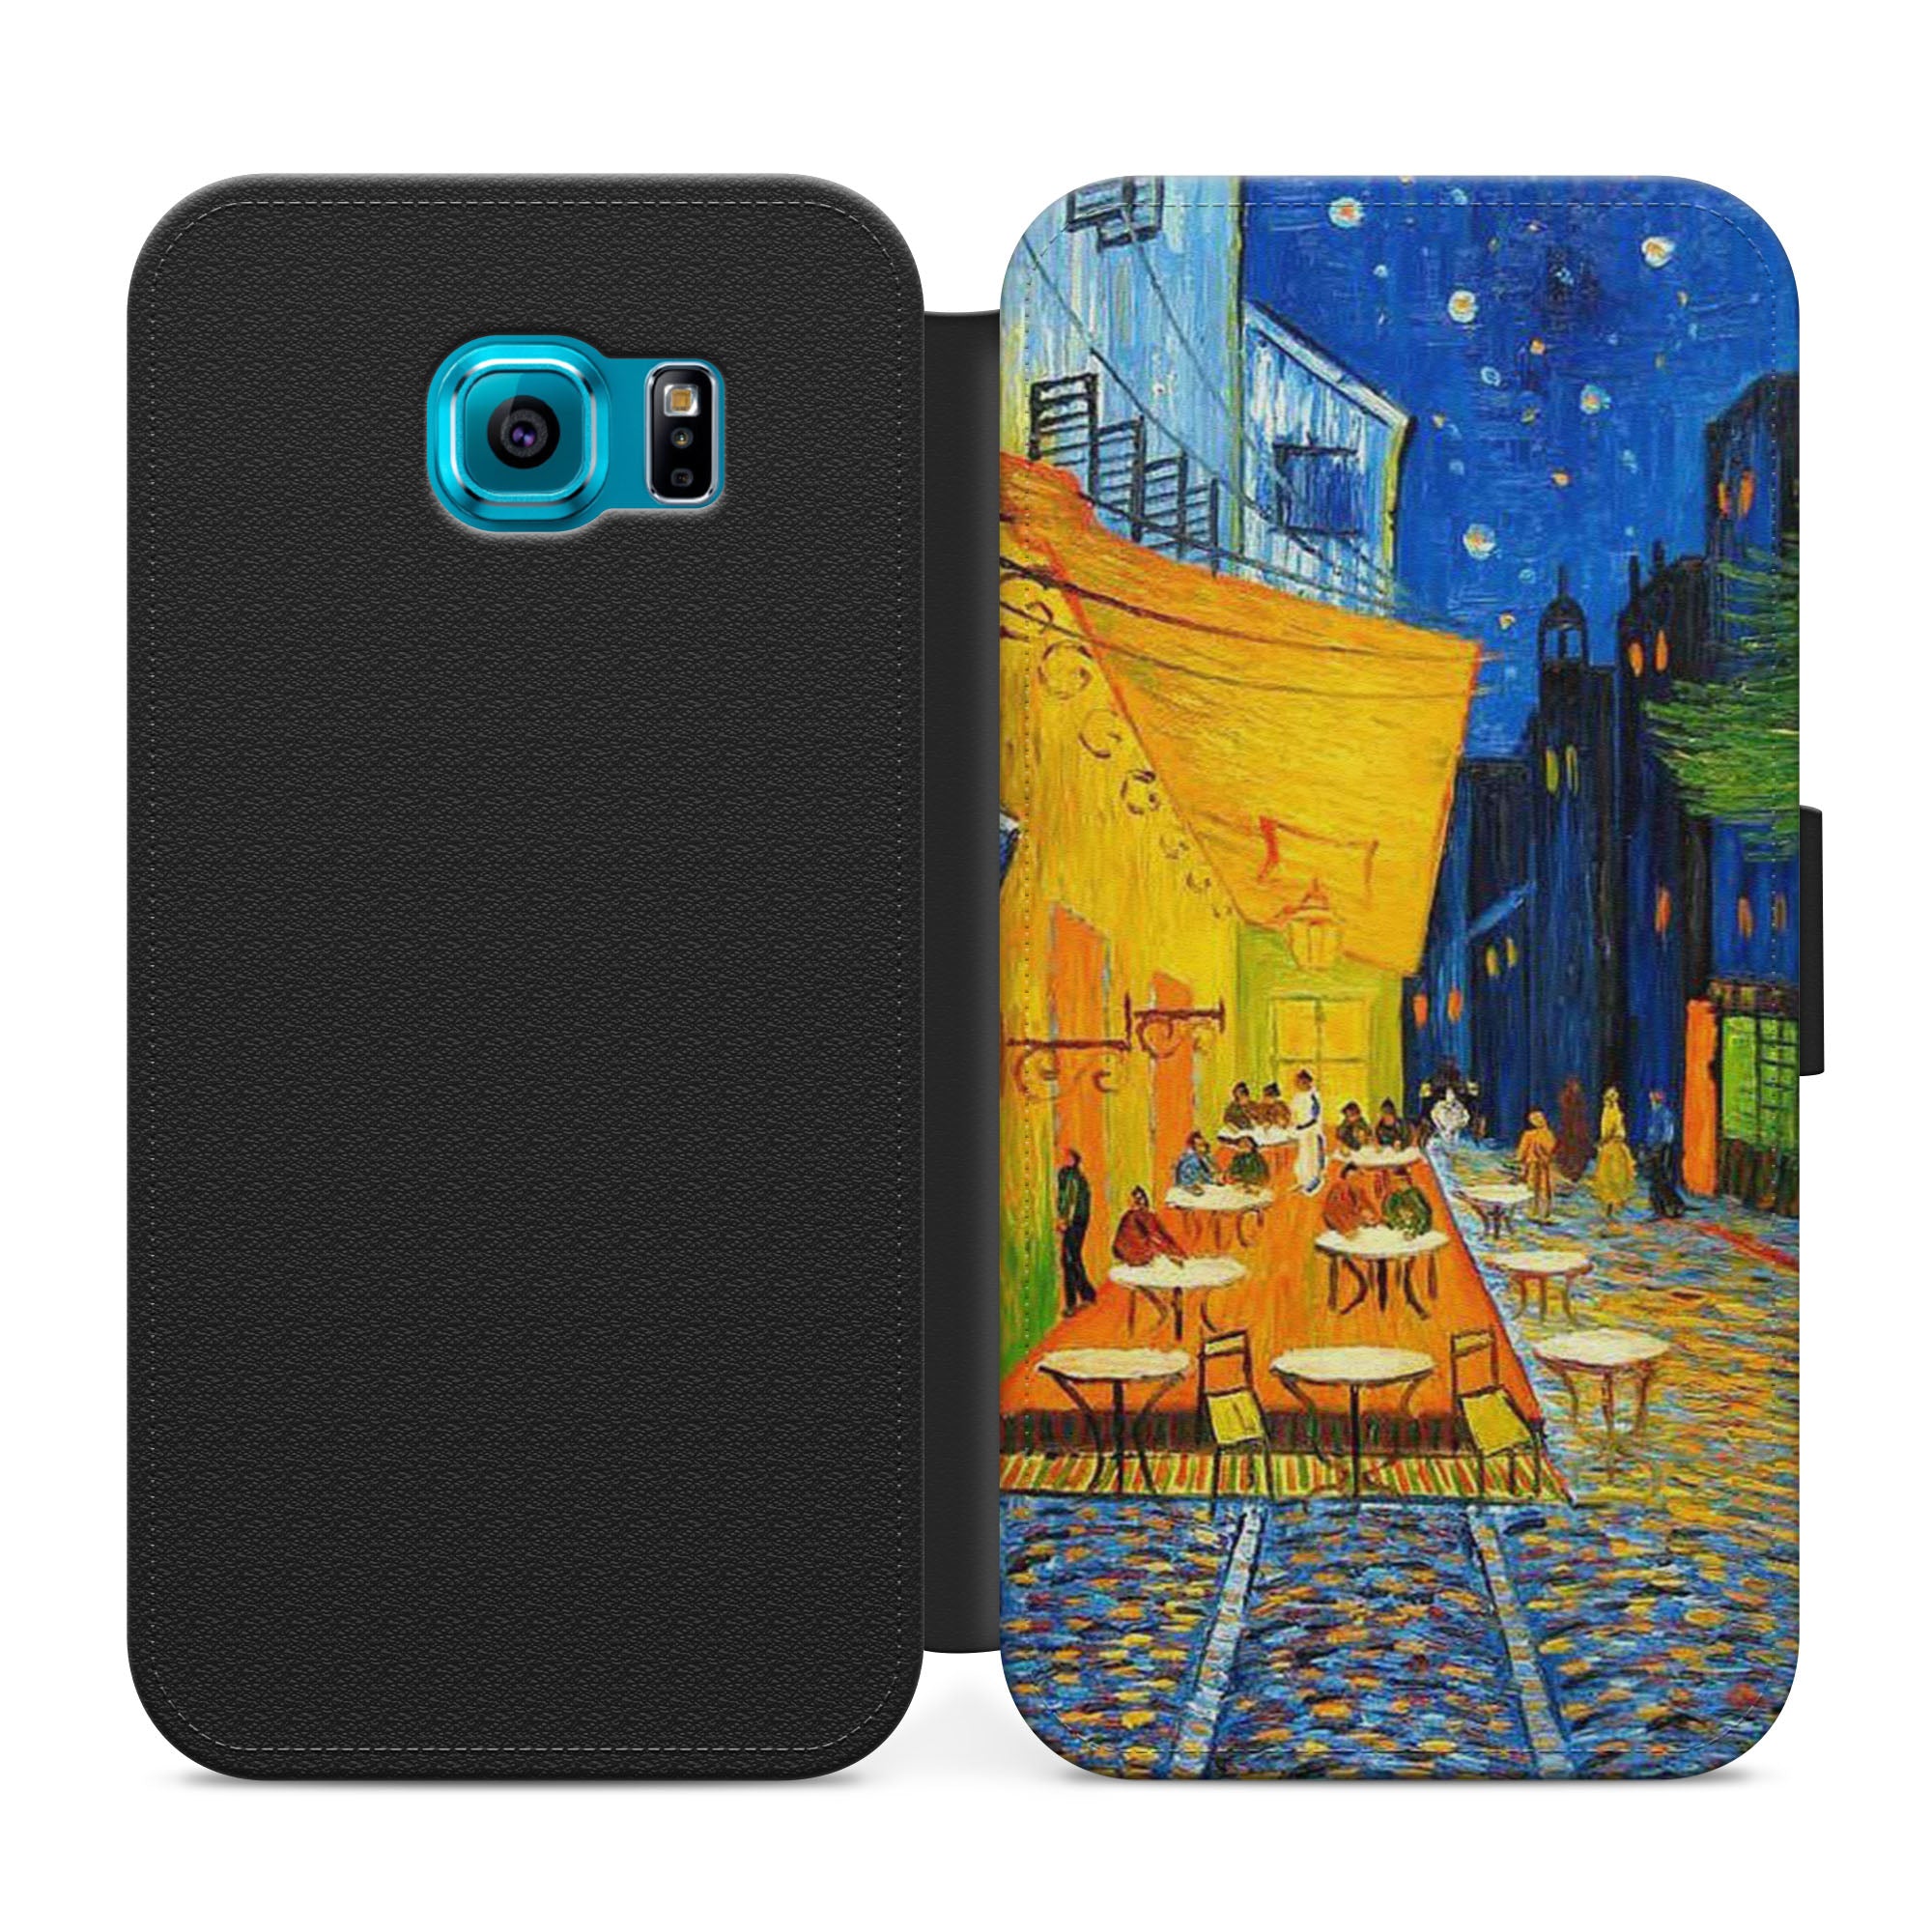 Van Gogh Print Faux Leather Flip Case Wallet for iPhone / Samsung